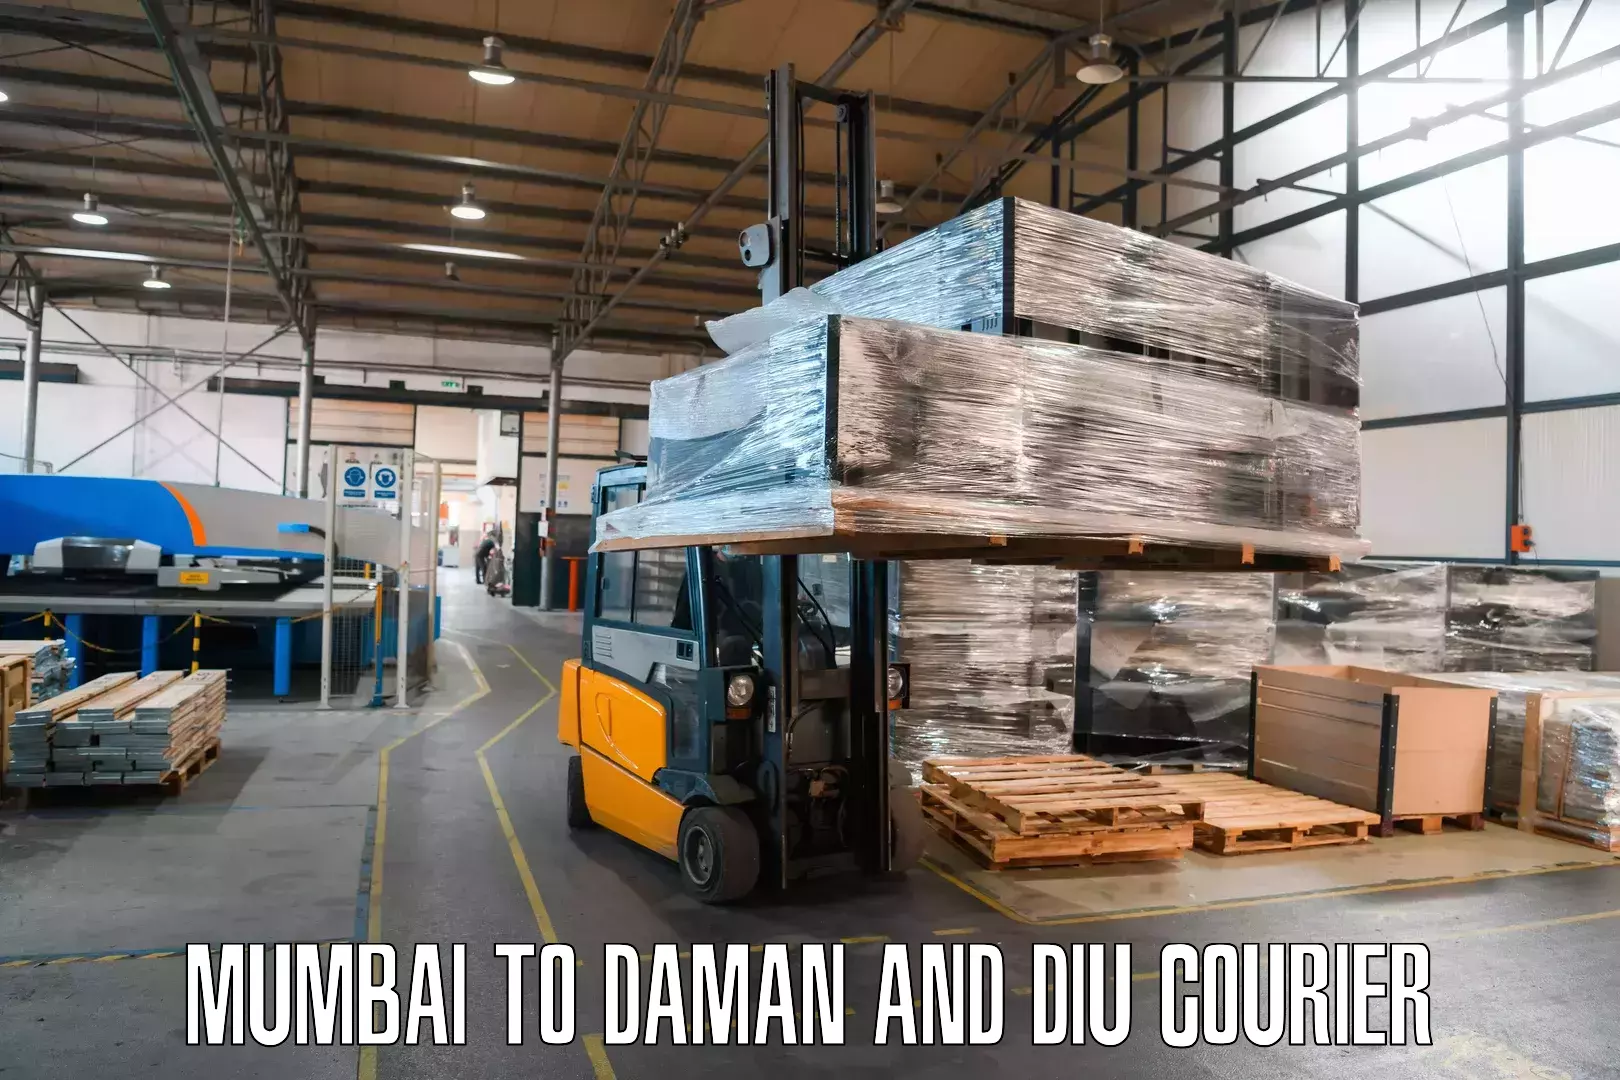 Express delivery solutions Mumbai to Diu